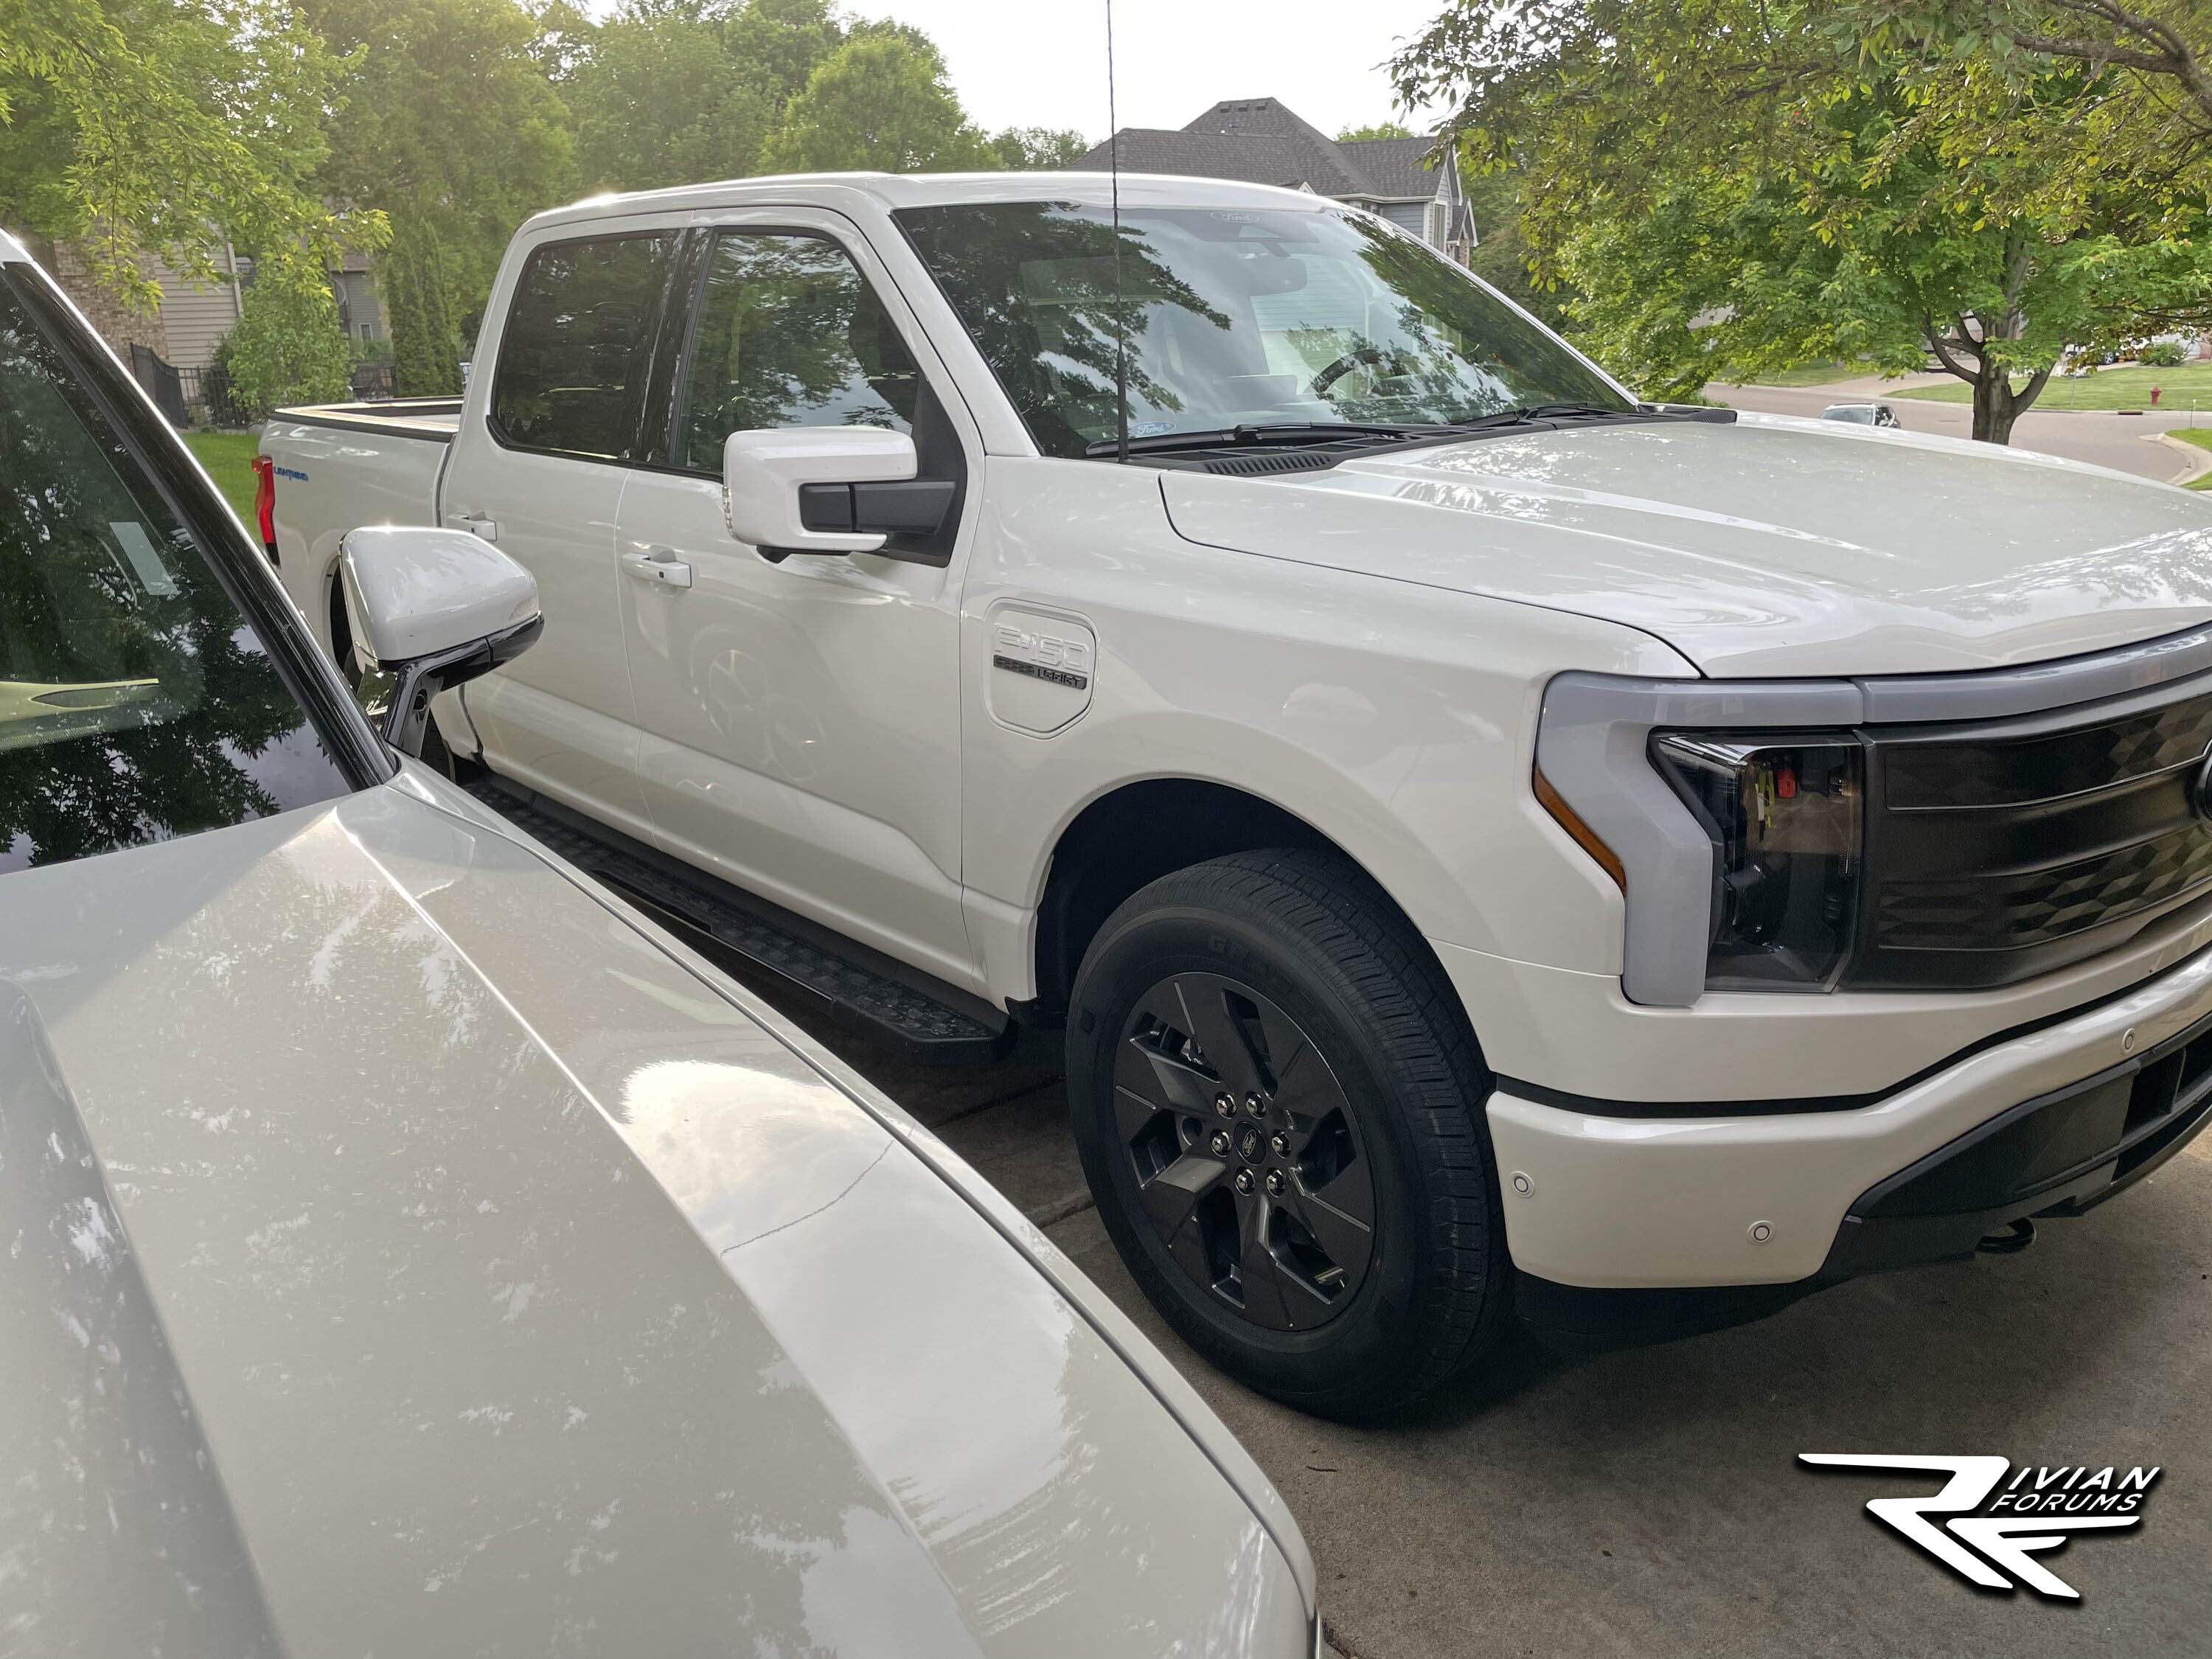 Rivian R1T vs Ford F150 Lightning comparison review by owner 2.jpeg